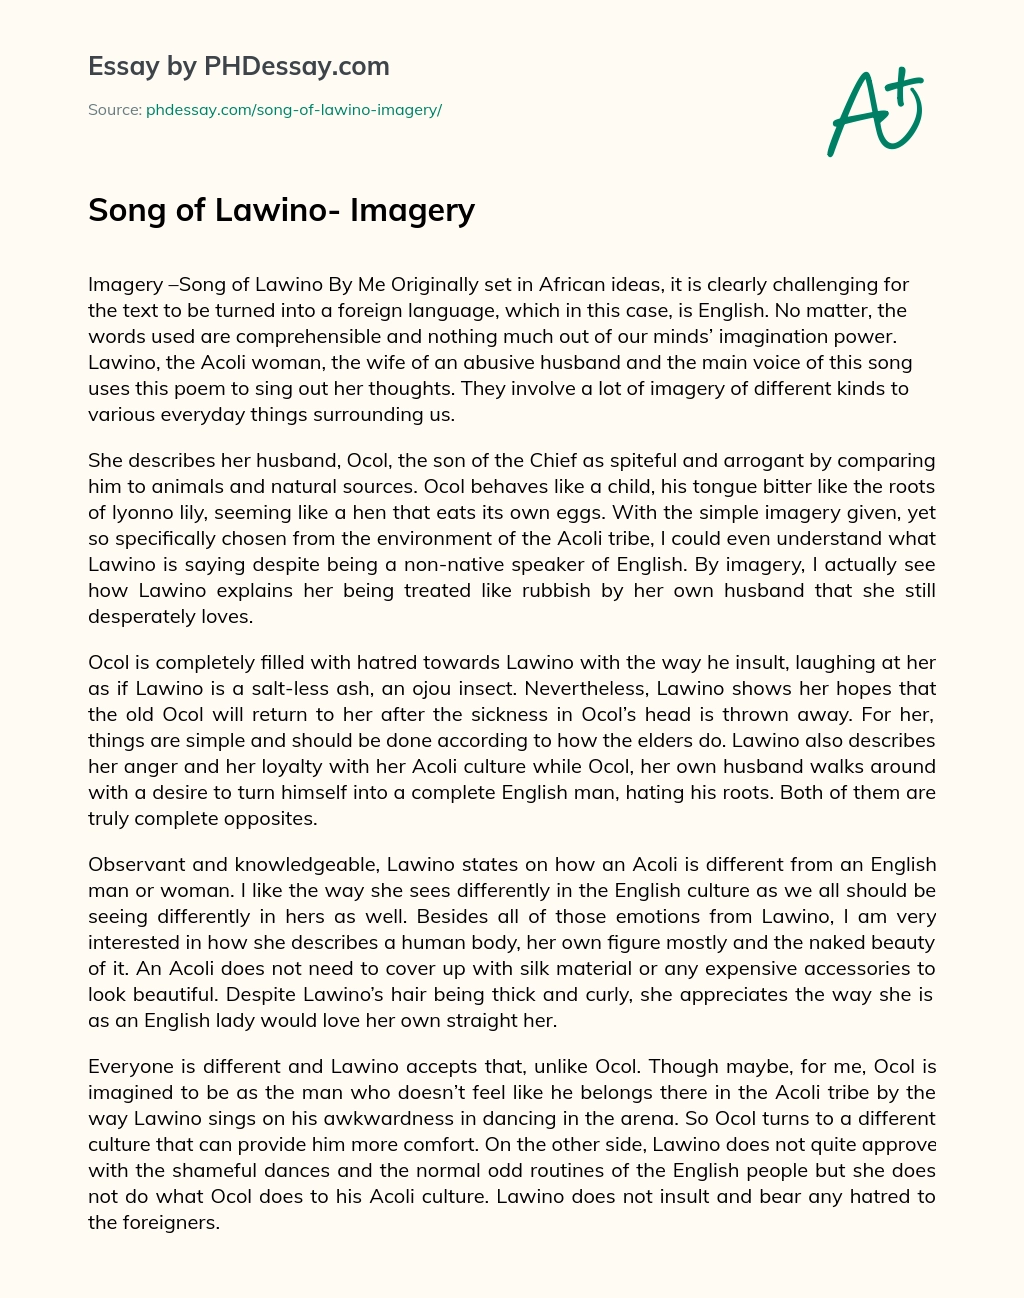 Song of Lawino- Imagery essay